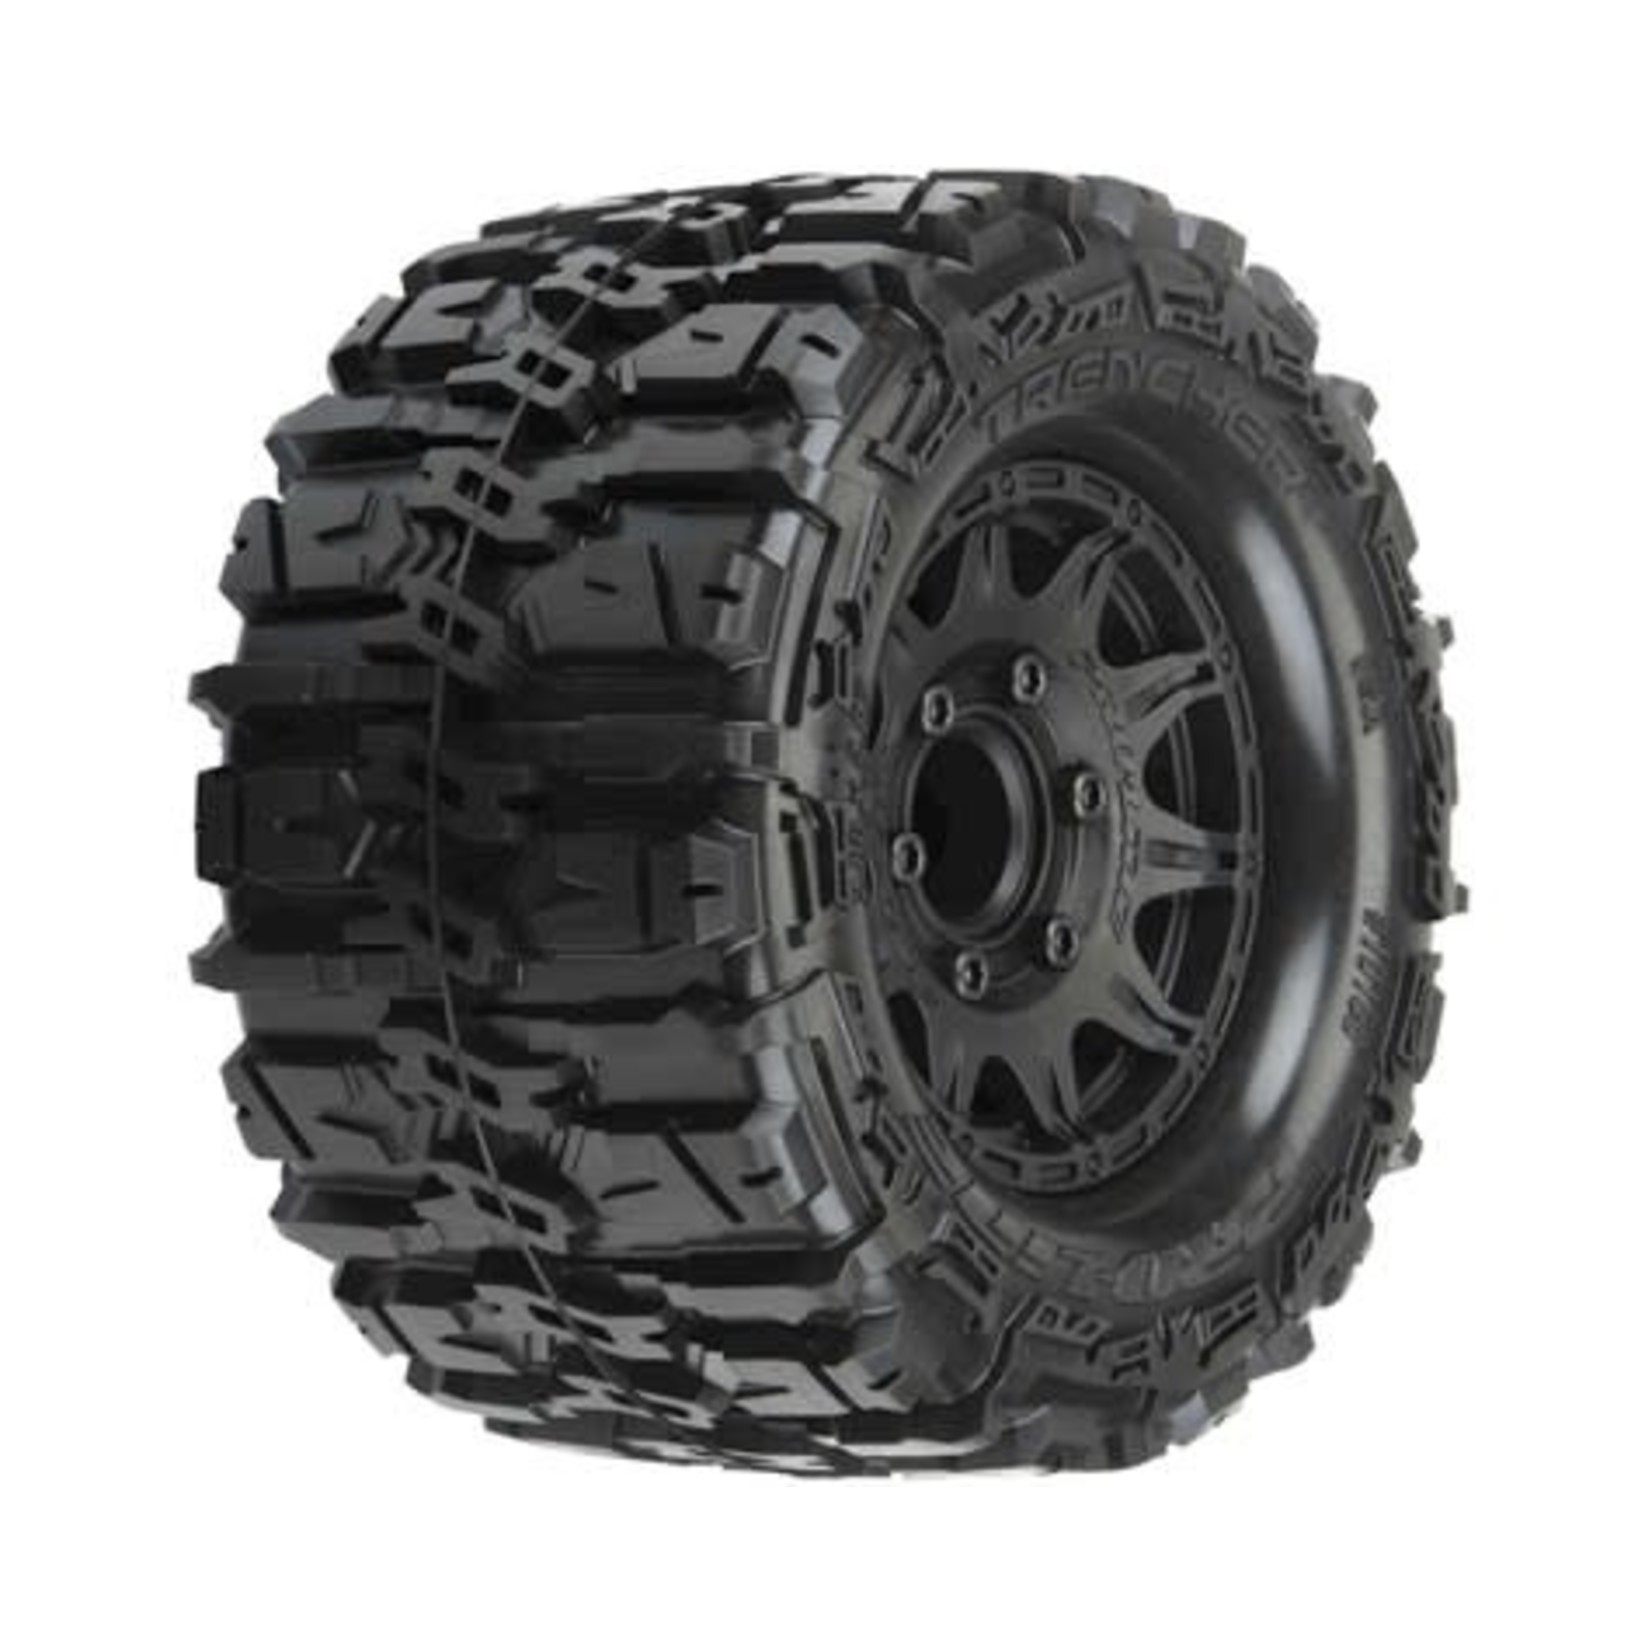 Pro-Line Pro-Line Trencher HP Belted 2.8" Pre-Mounted Truck Tires (M2) (2) (Black) #10168-10